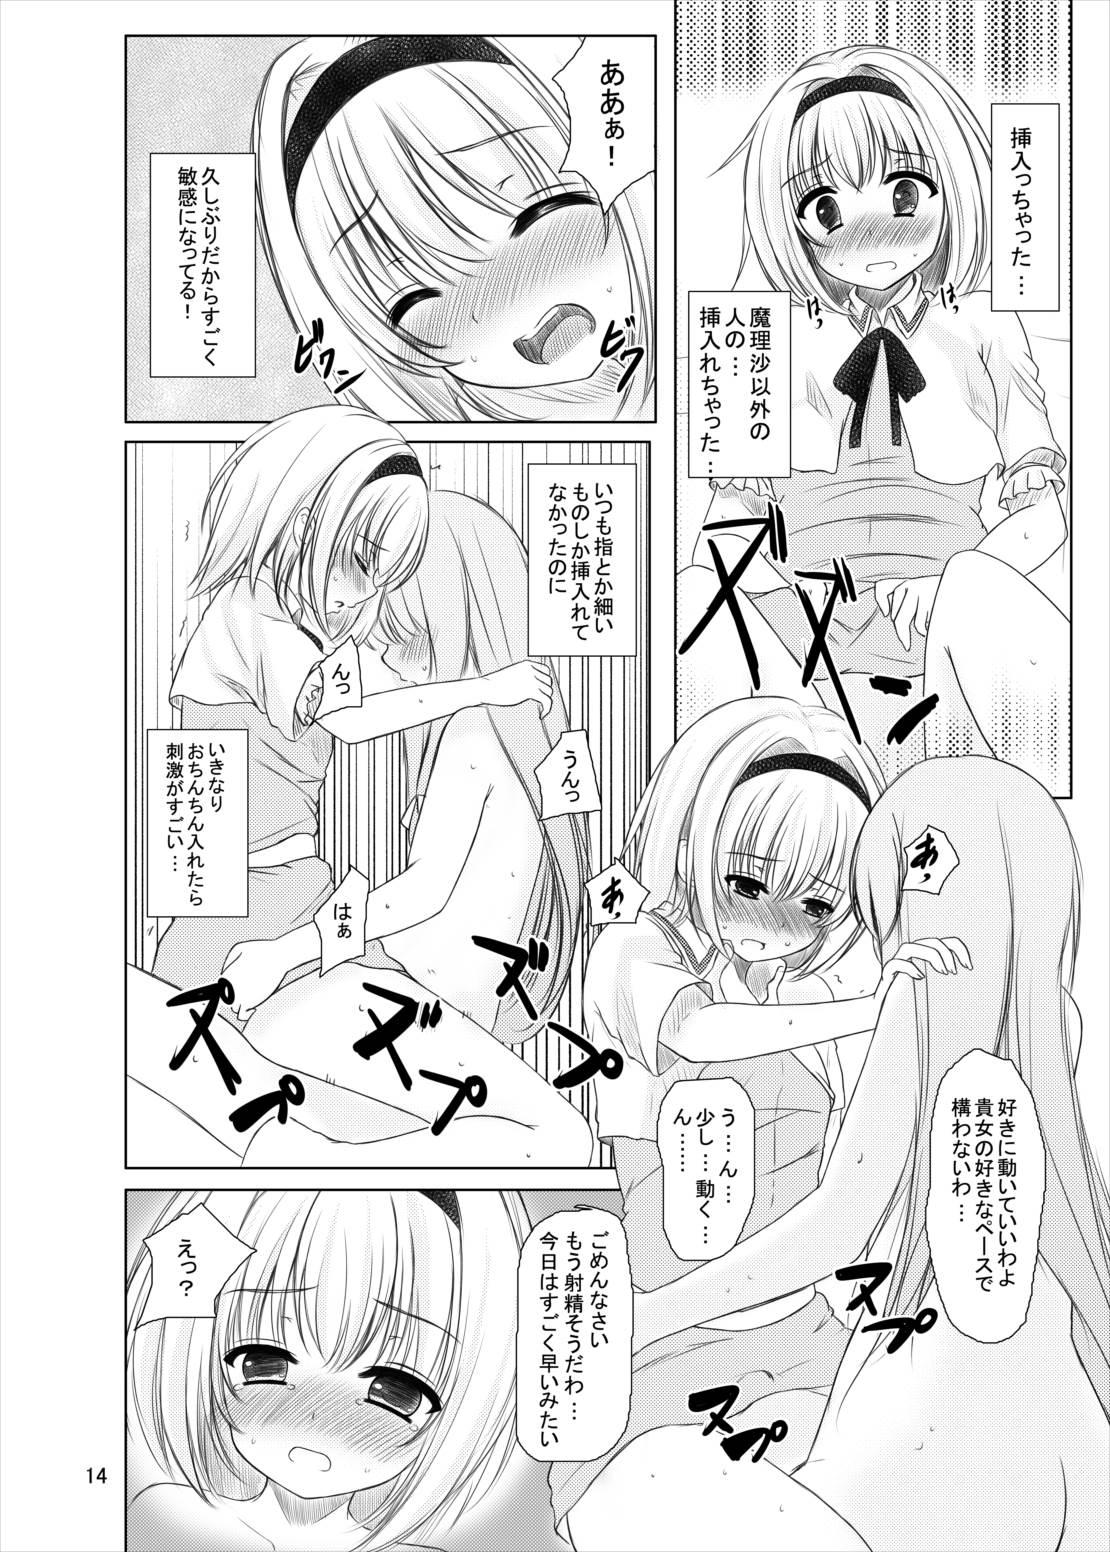 Sloppy Blowjob Manupilate puppet - Touhou project Gaystraight - Page 13